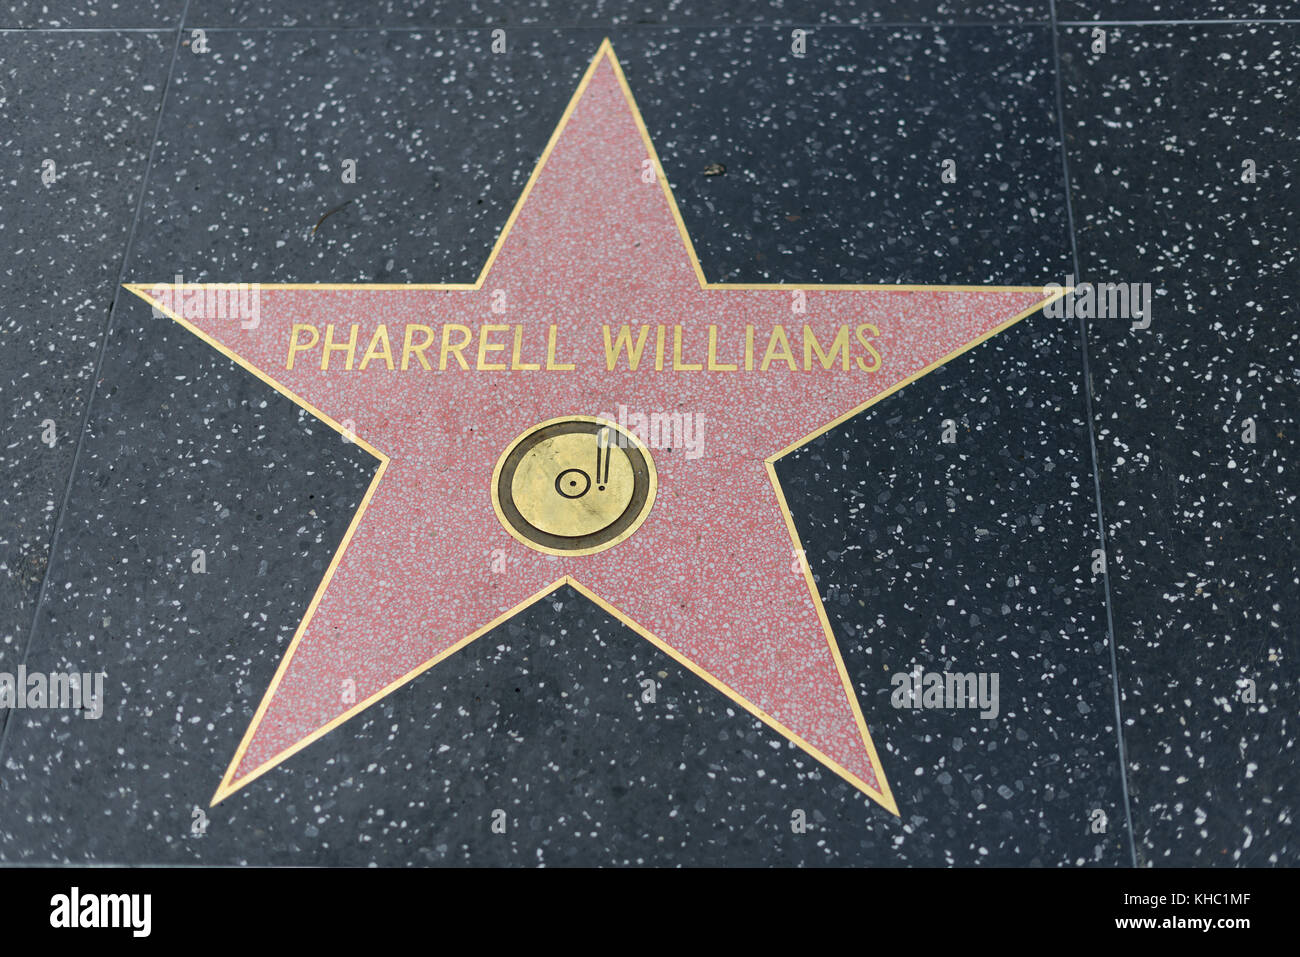 HOLLYWOOD, CA - DECEMBER 06: Pharrell Williams star on the Hollywood Walk of Fame in Hollywood, California on Dec. 6, 2016. Stock Photo